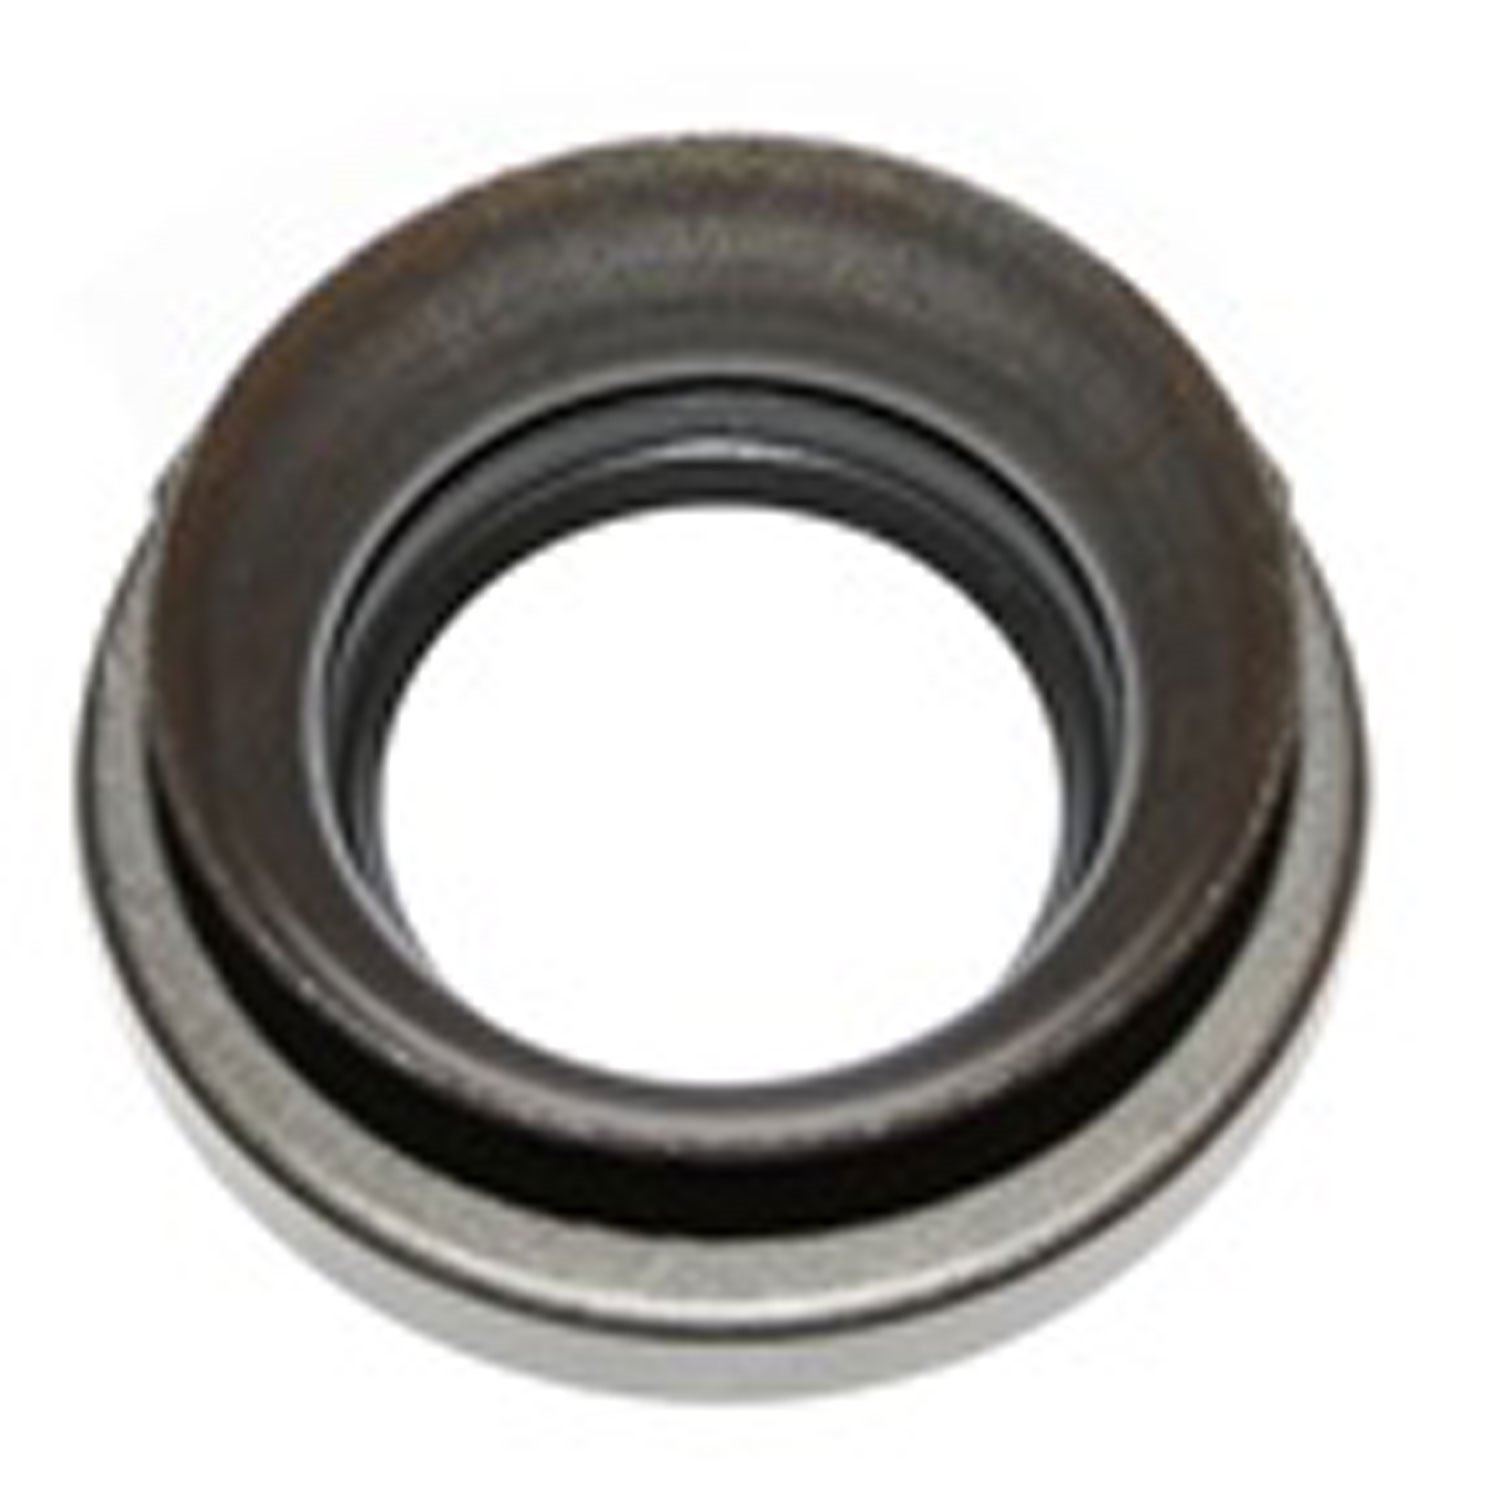 This inner axle oil seal from Omix-ADA fits 72-06 Jeep models with Dana 30 front axle.